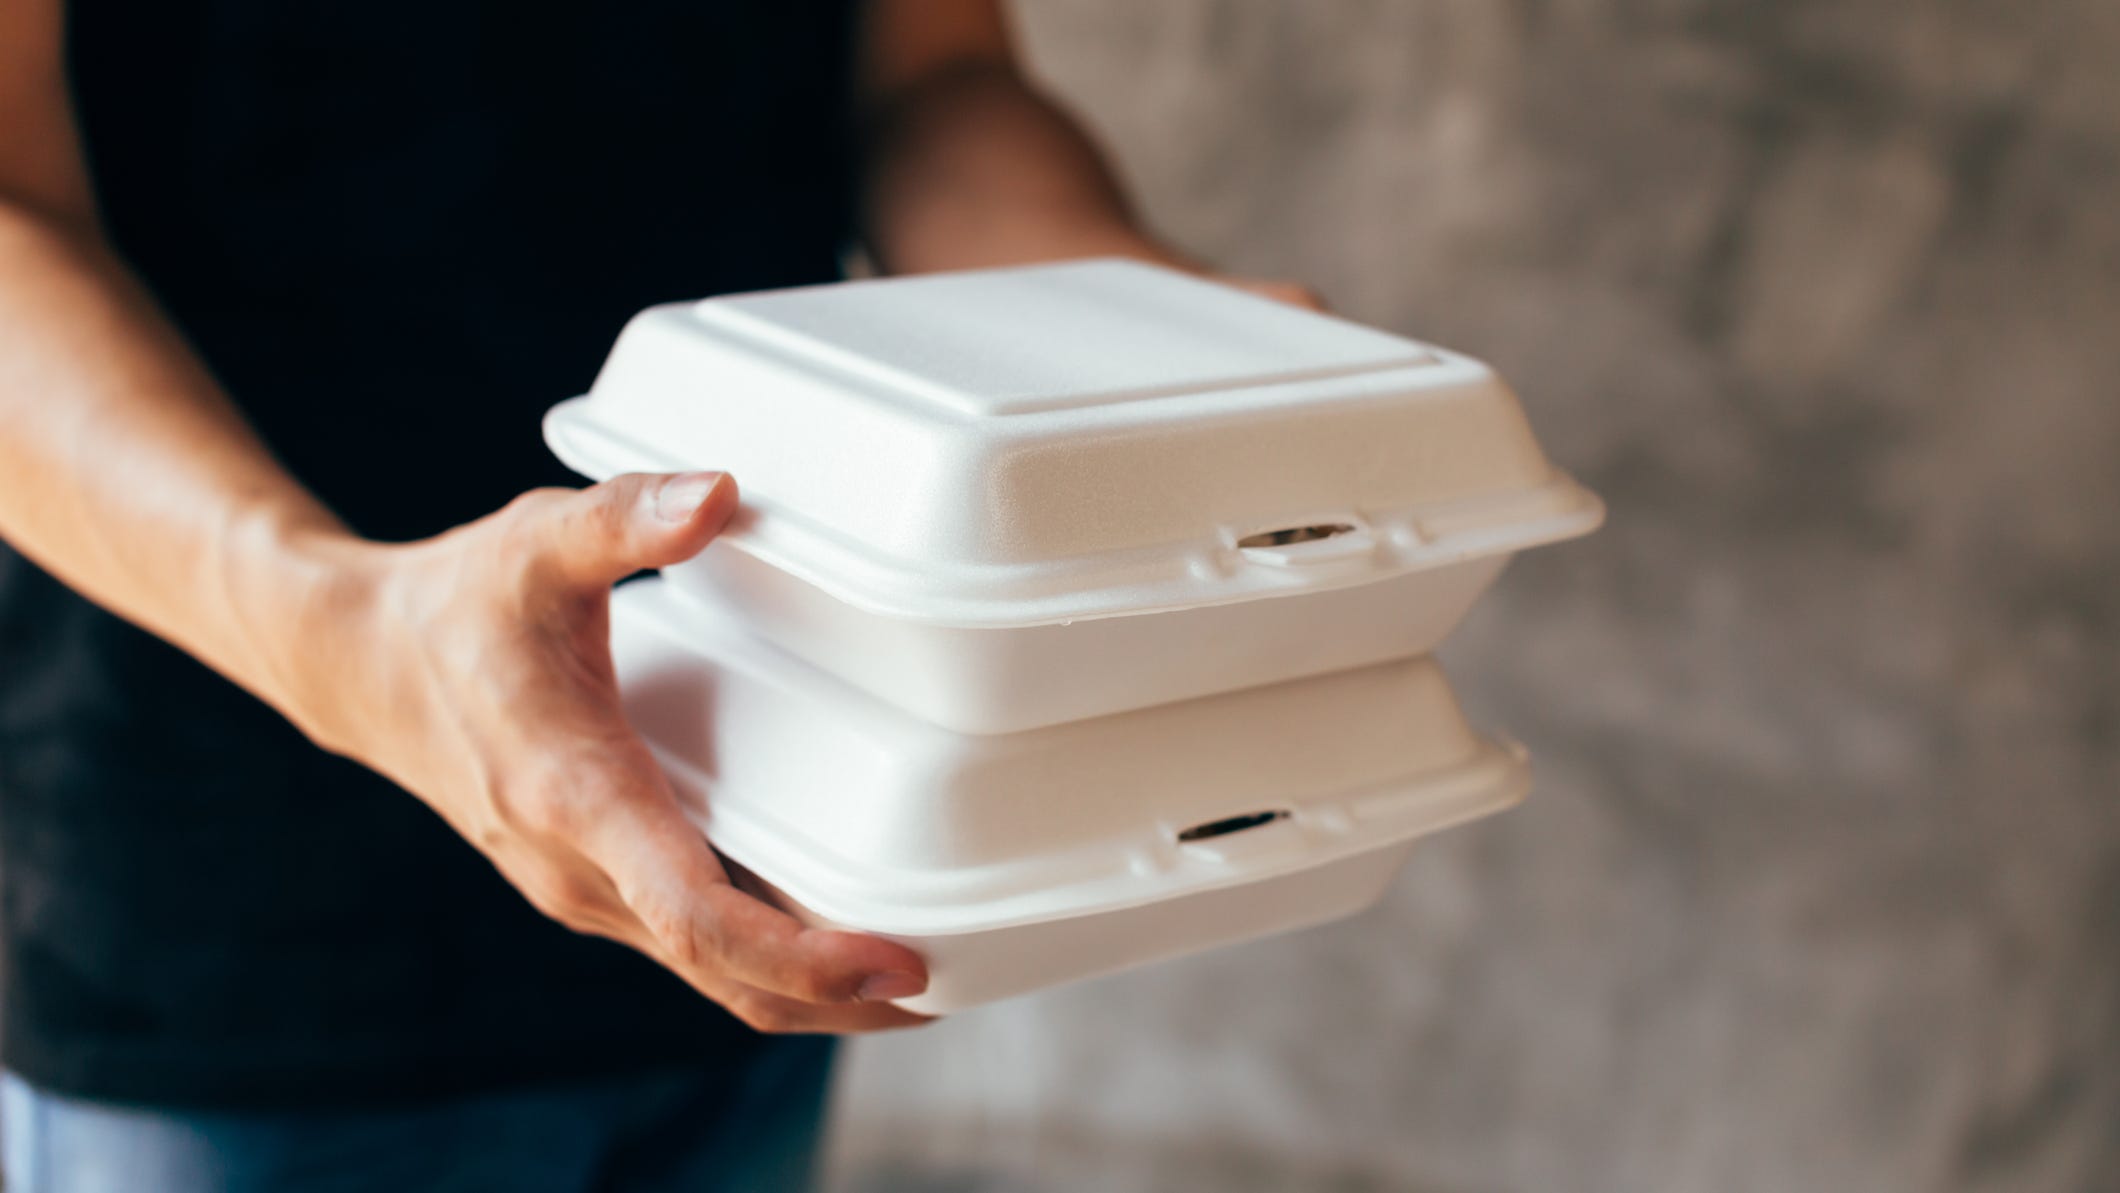 Oregon lawmakers are considering a ban on foam food containers.